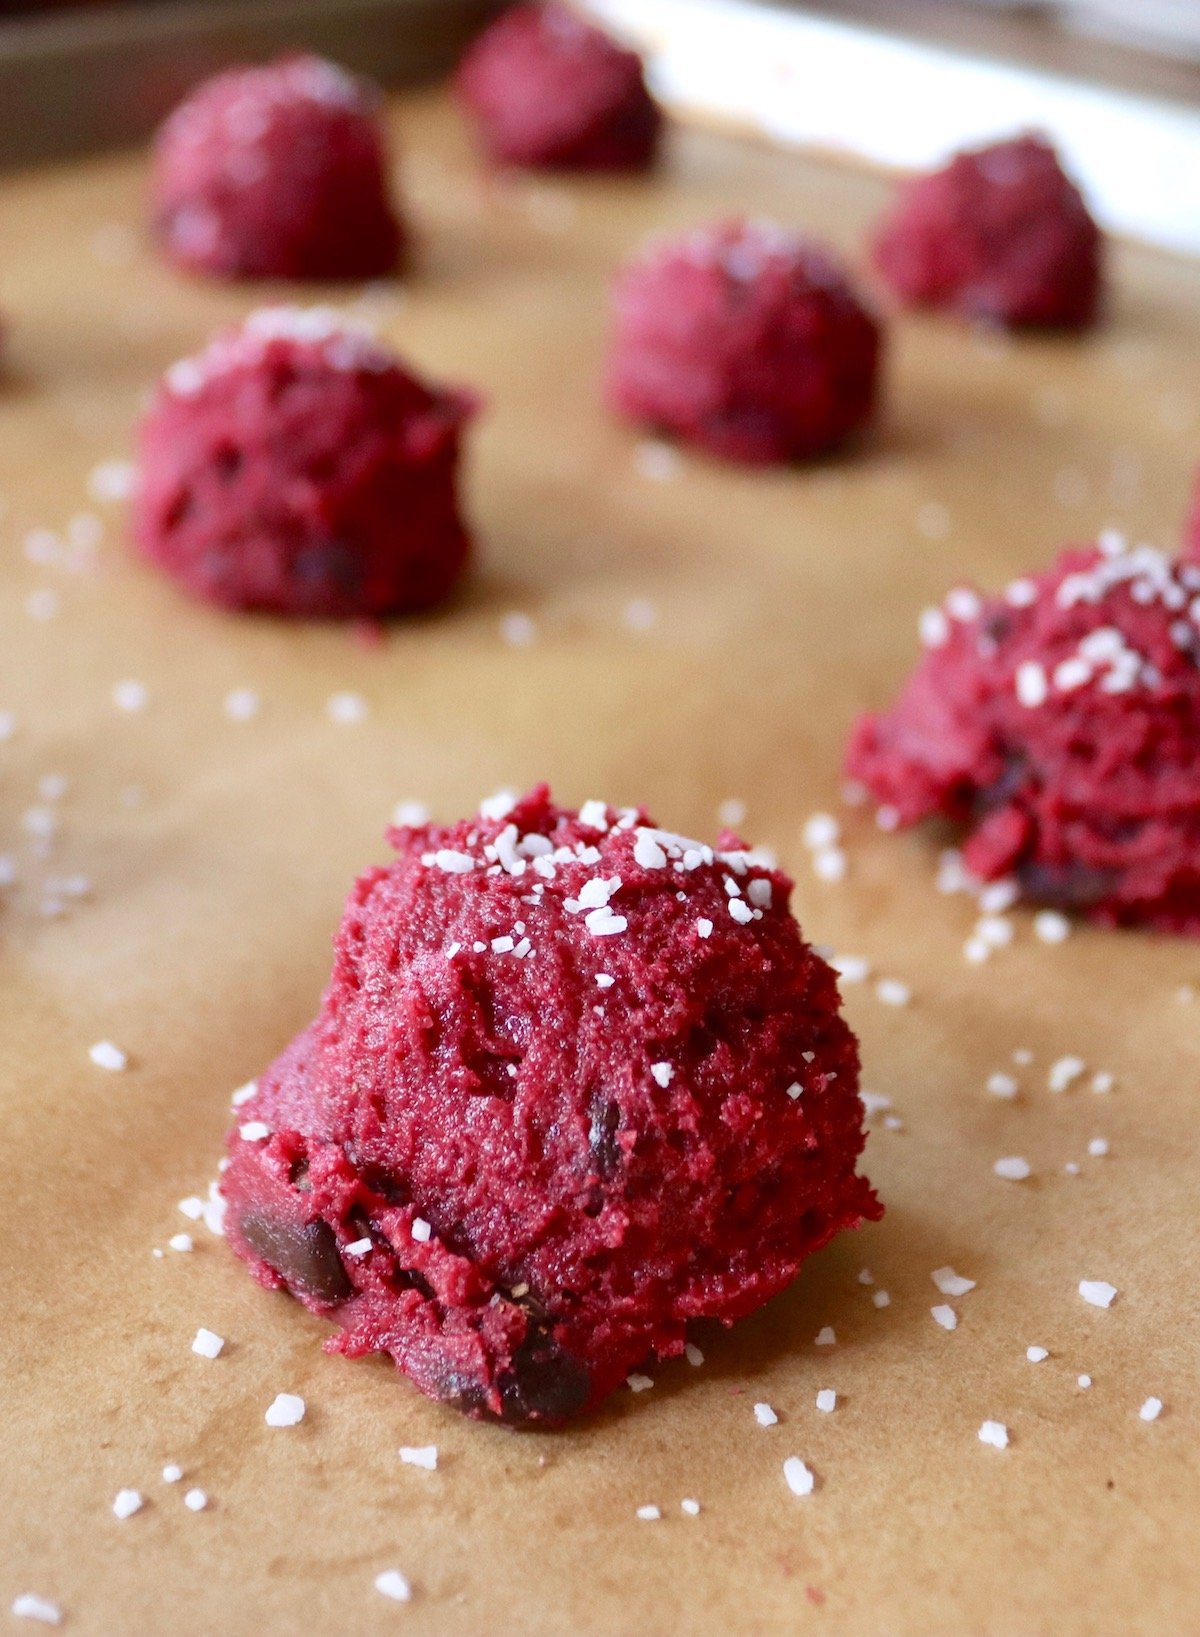 Chocolate chip beet cookie dough shaped into balls with sprinkled salt, on parchment paper.